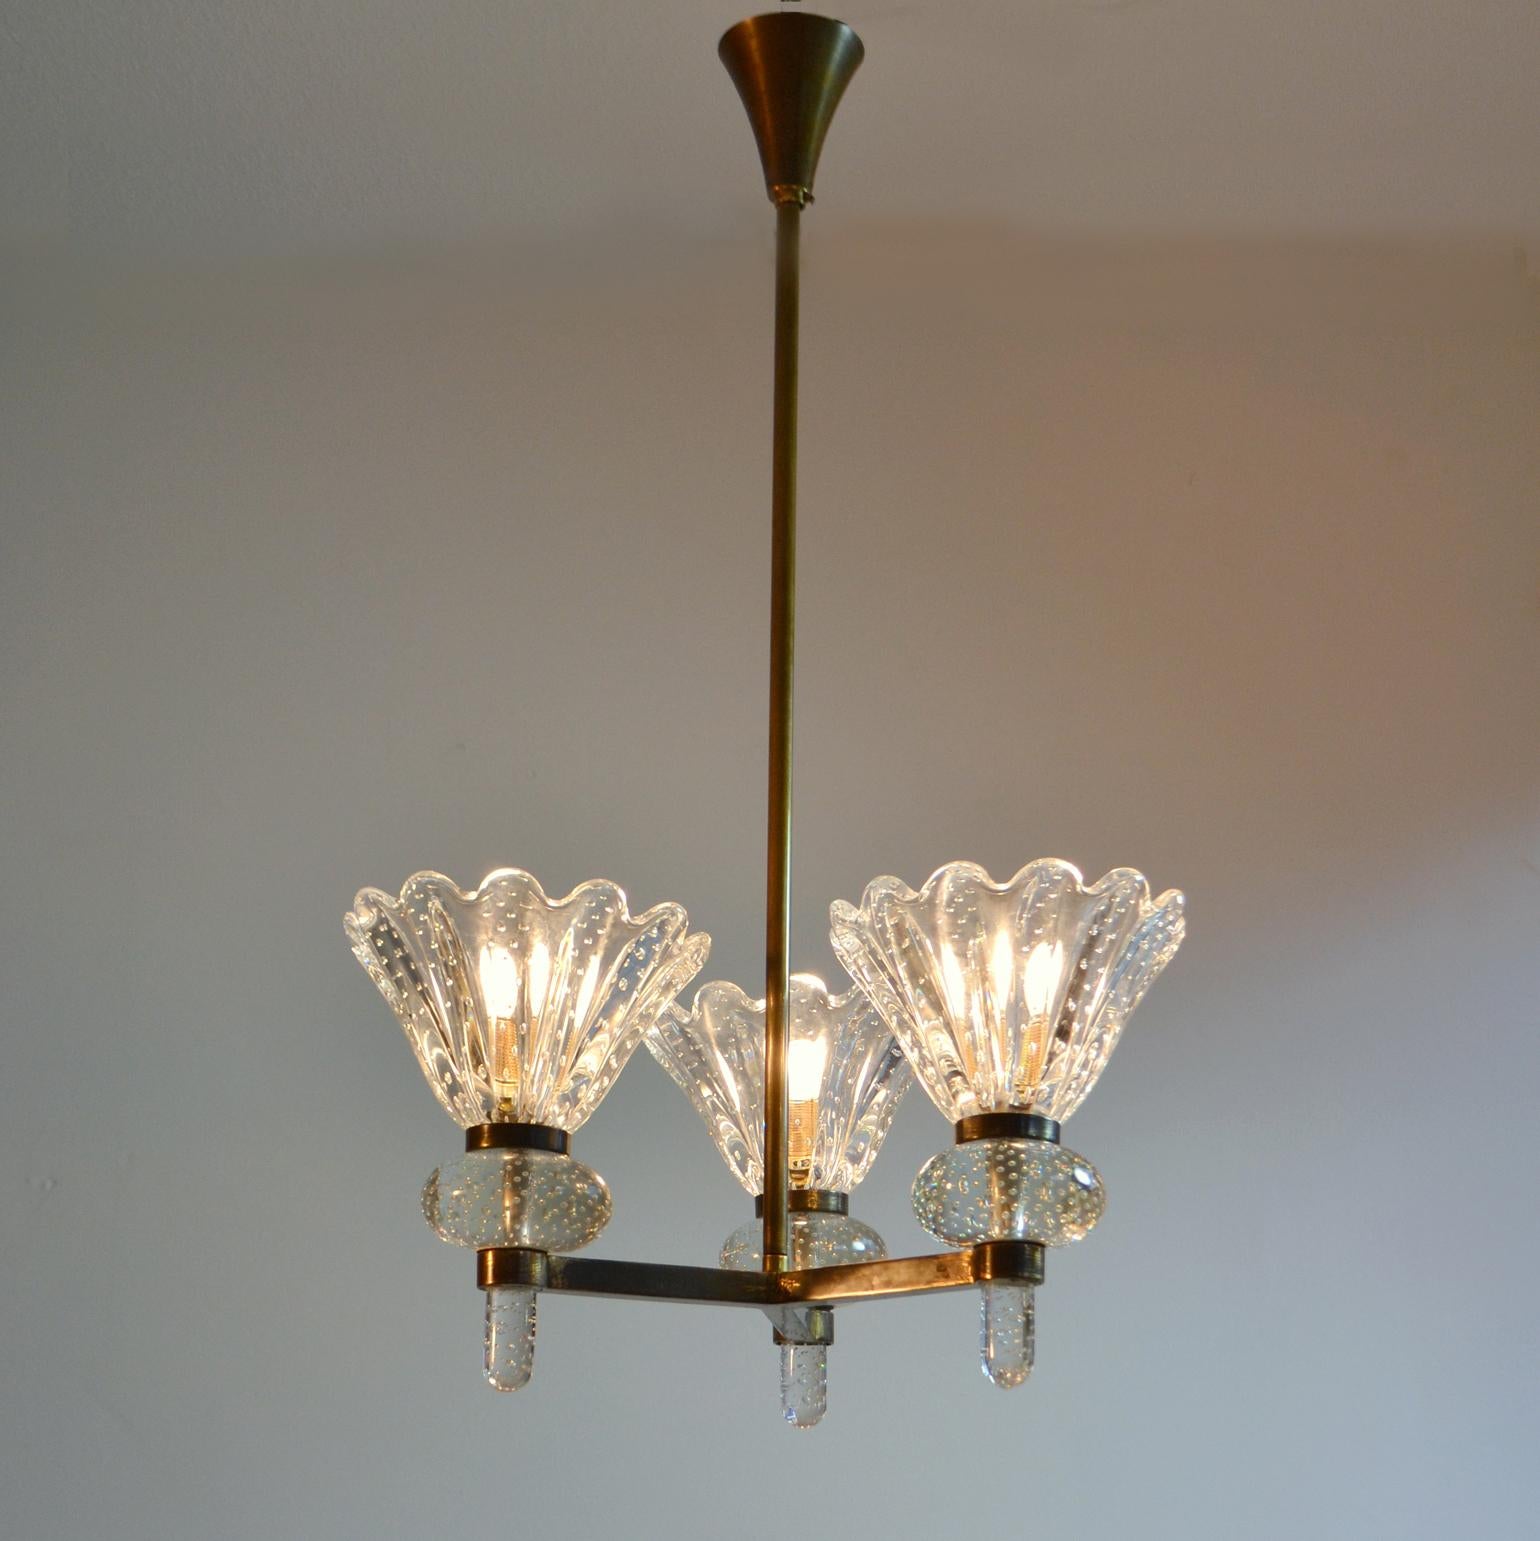 Murano Pulegos glass three arm chandelier on brass frame creates fountain of the light. The clear glass scalloped shades of this elaborate lamp are mouth-blown and rest like torches in the brass frame. Barovier & Toso Murano Murano glass and brass